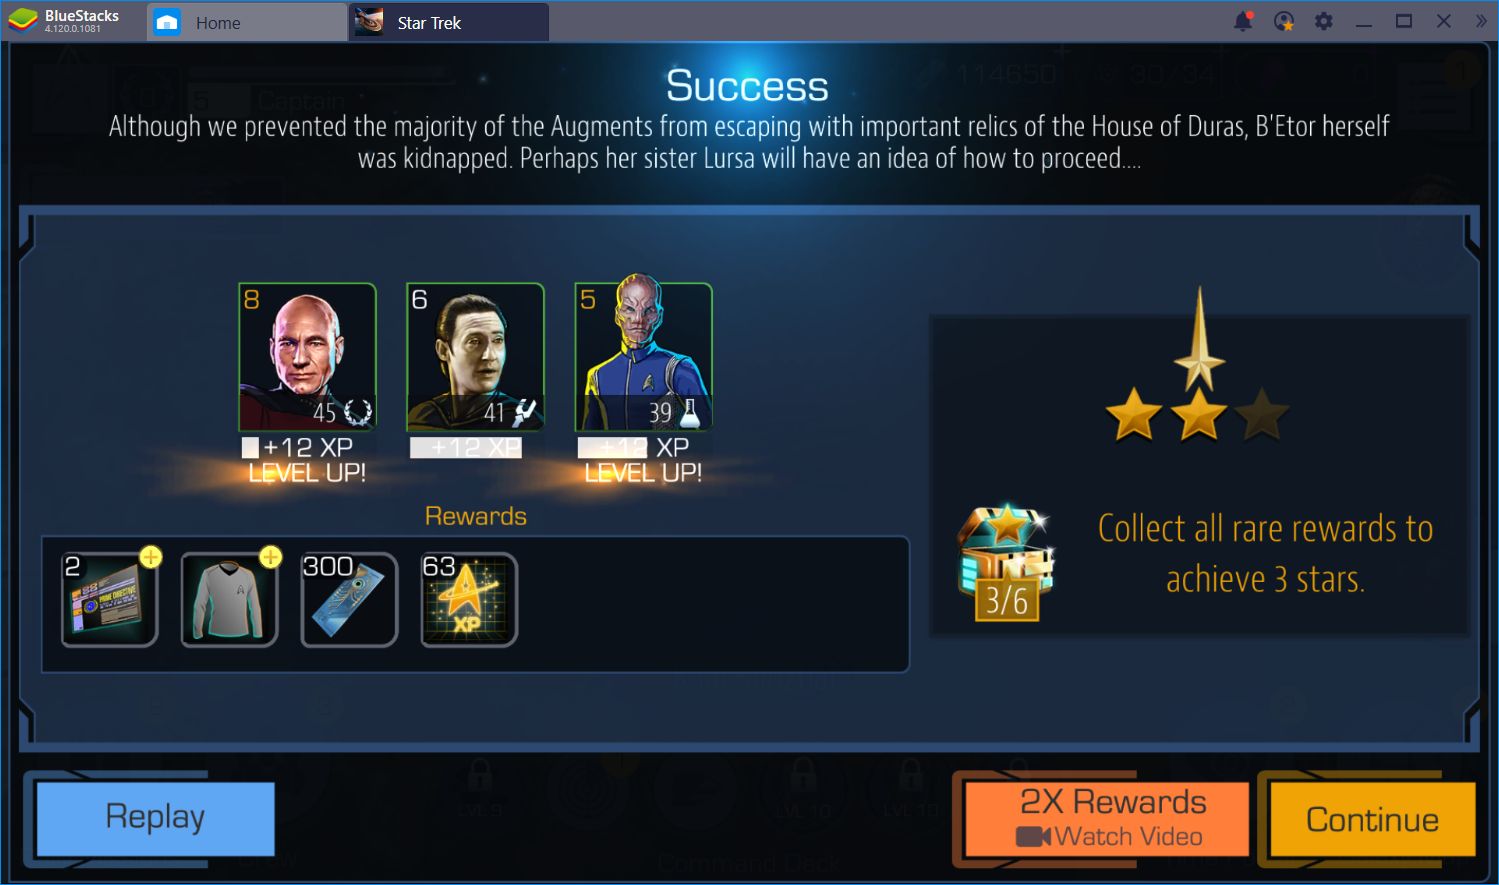 A Guide to Missions and Battles in Star Trek Timelines